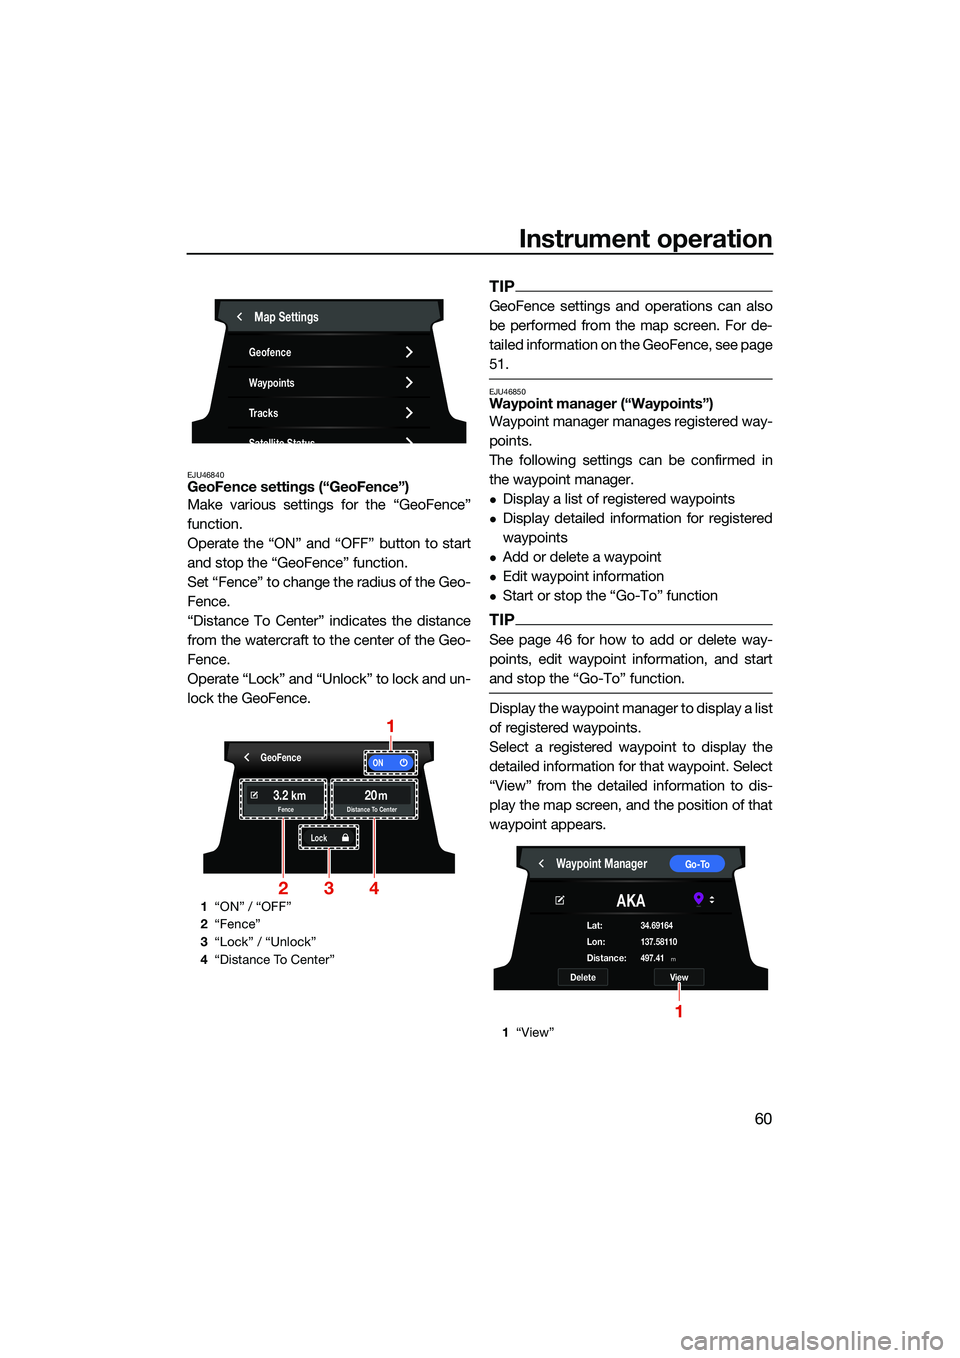 YAMAHA FX HO CRUISER 2022 Repair Manual Instrument operation
60
EJU46840GeoFence settings (“GeoFence”)
Make various settings for the “GeoFence”
function.
Operate the “ON” and “OFF” button to start
and stop the “GeoFence”